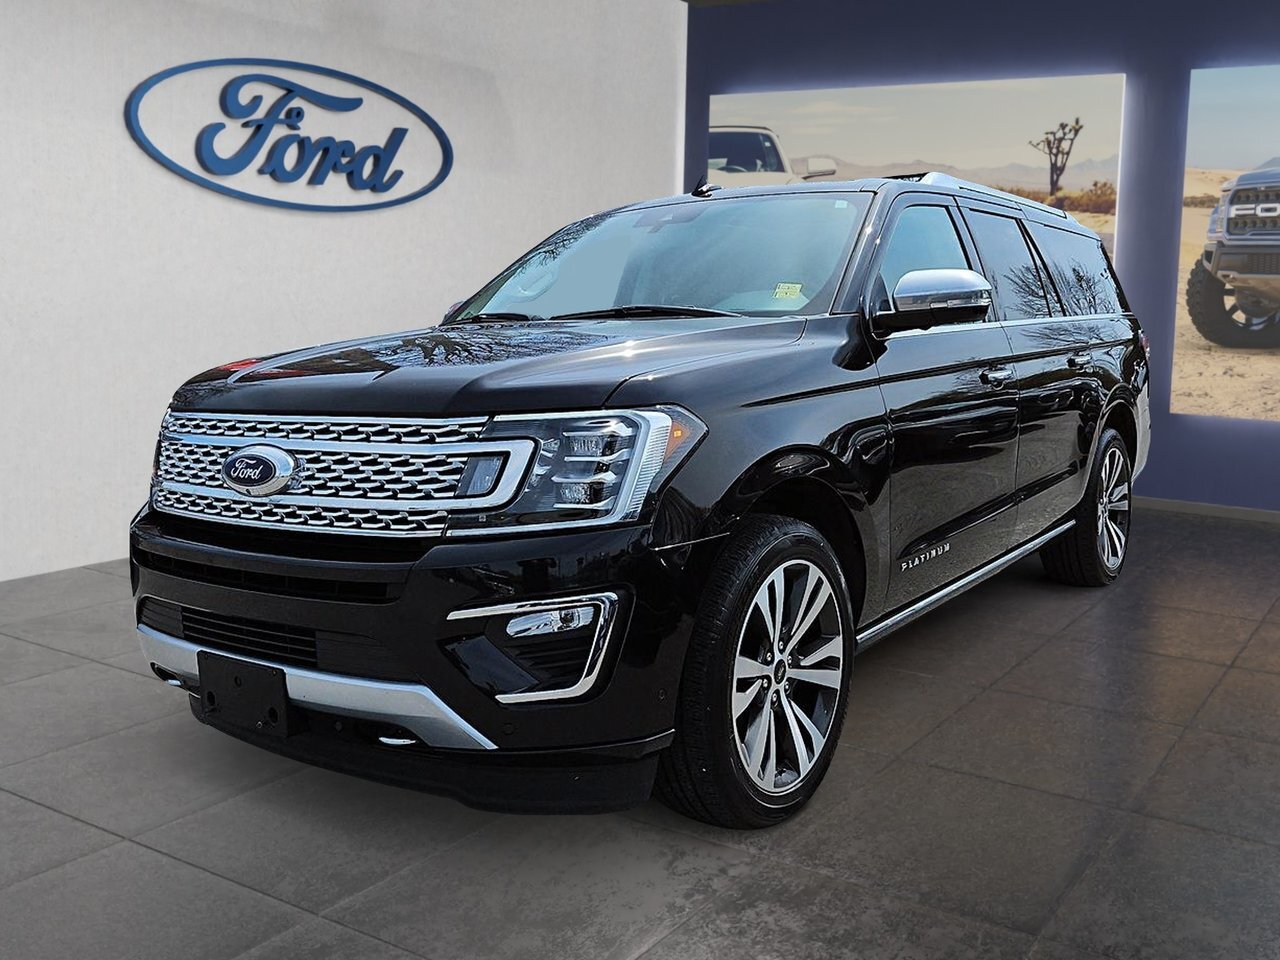 2020 Ford Expedition PLATINUM | MAX | EXTENDED LENGTH